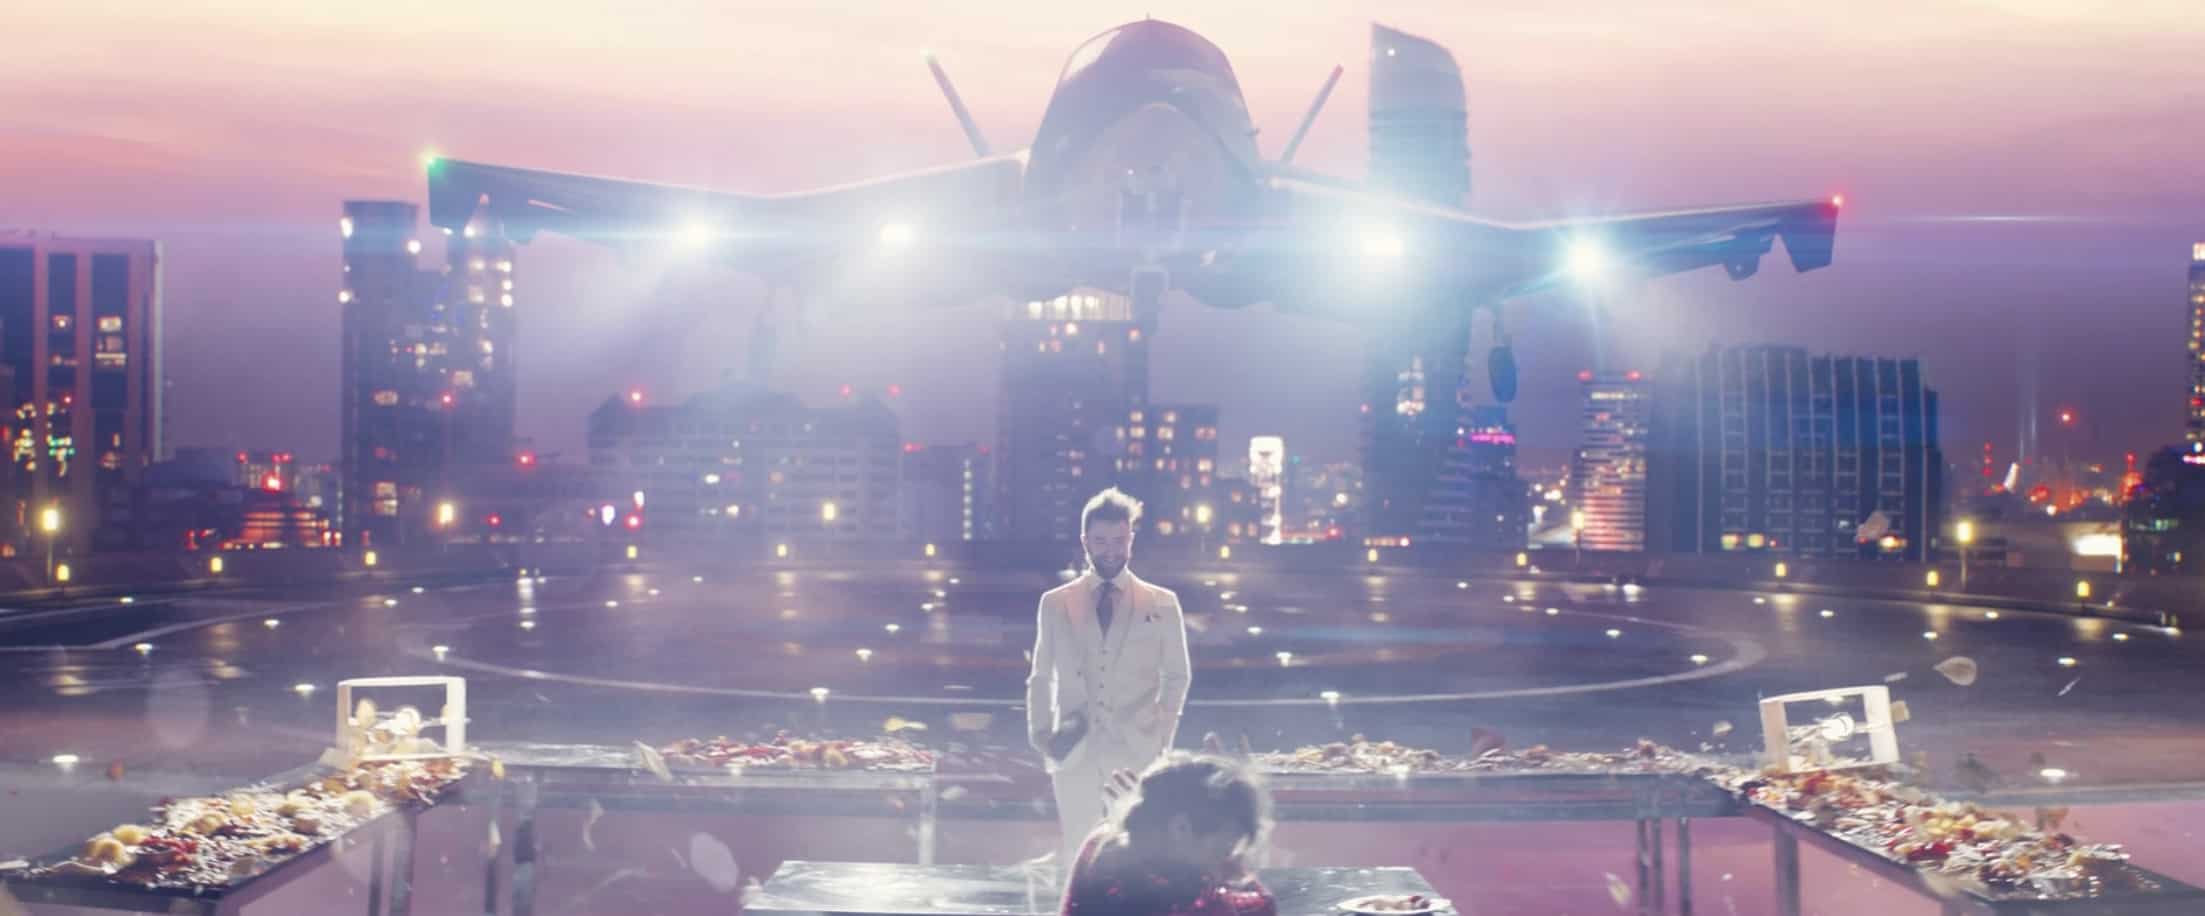 A man in a white suit standing in front of a table with an airplane and city skyline as the backdrop in this image from Amazon Prime Video